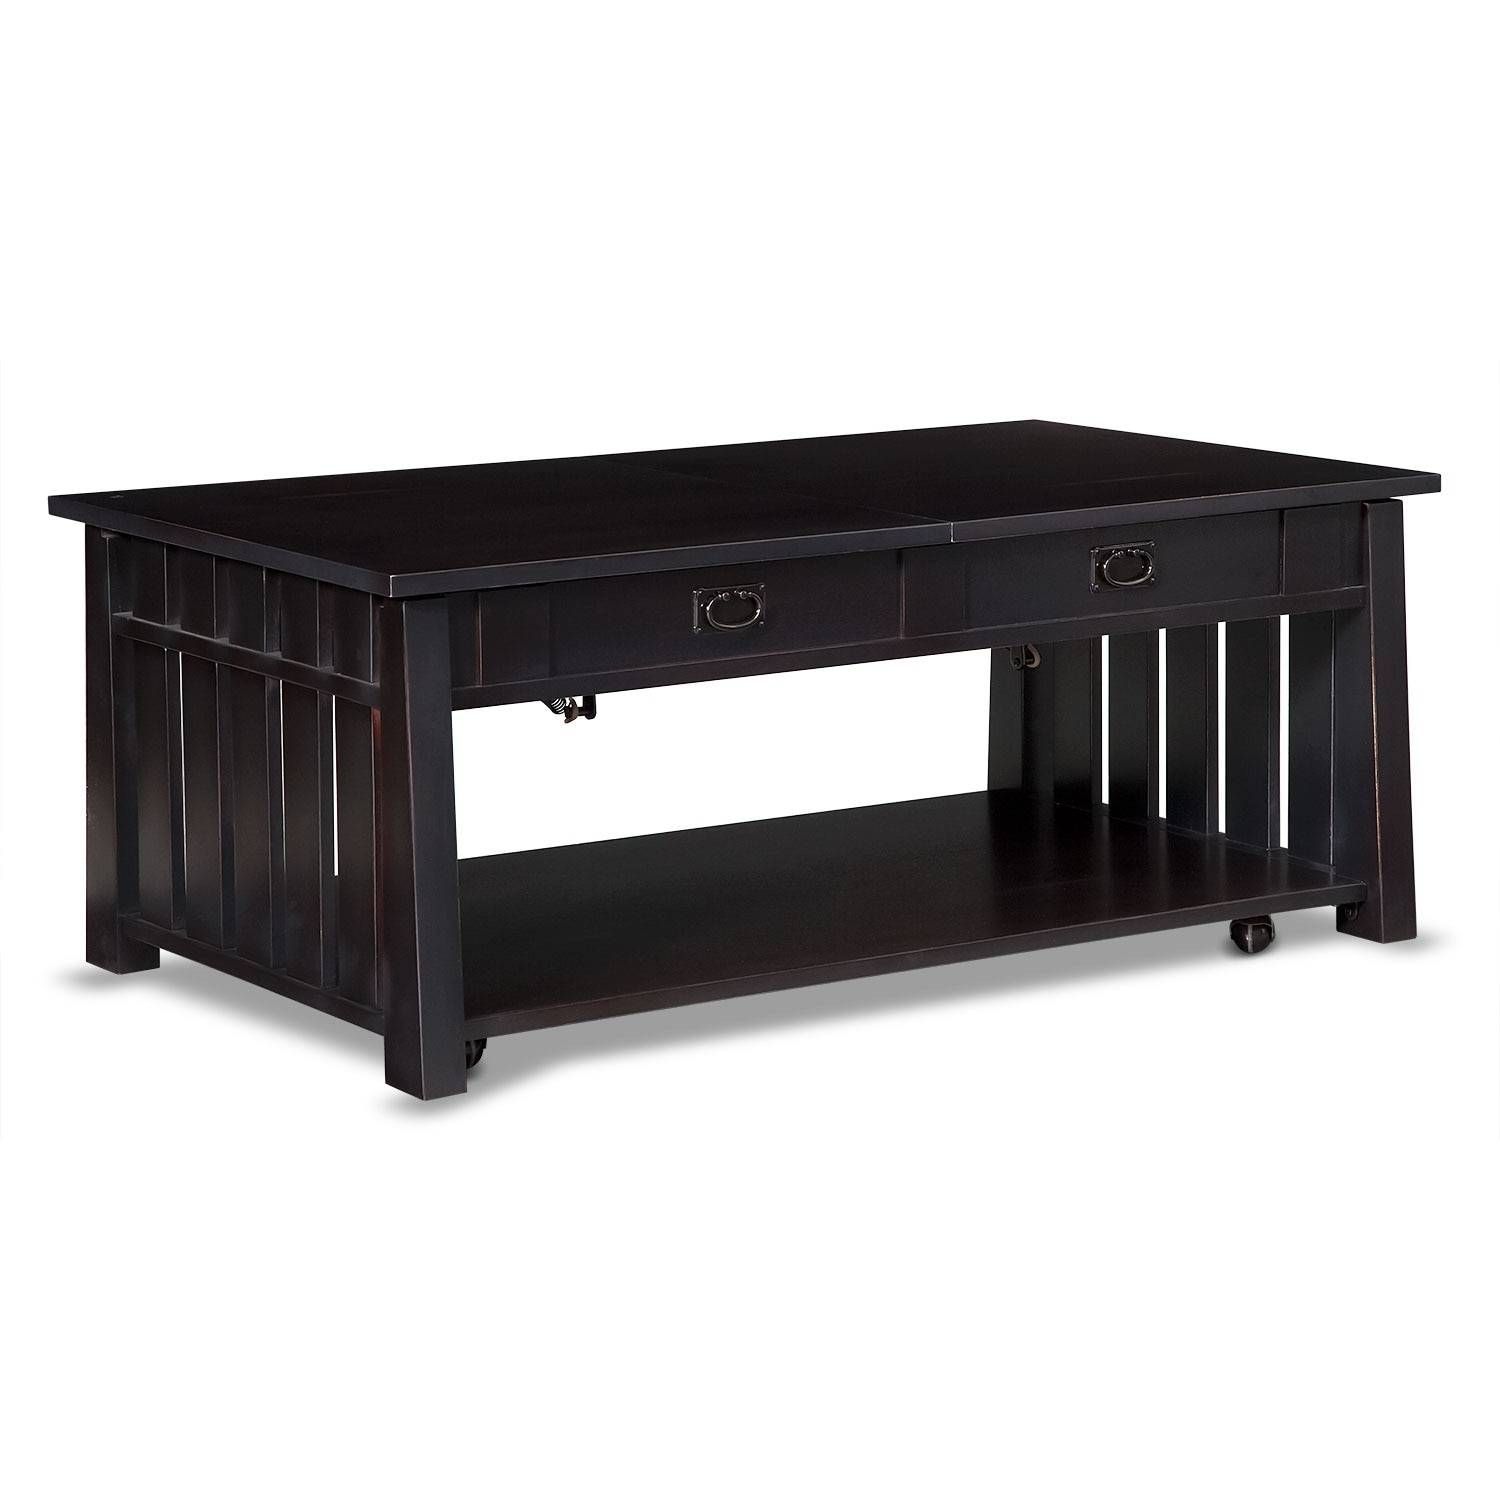 Coffee Tables | Living Room Tables | Value City Furniture Within White And Black Coffee Tables (View 13 of 30)